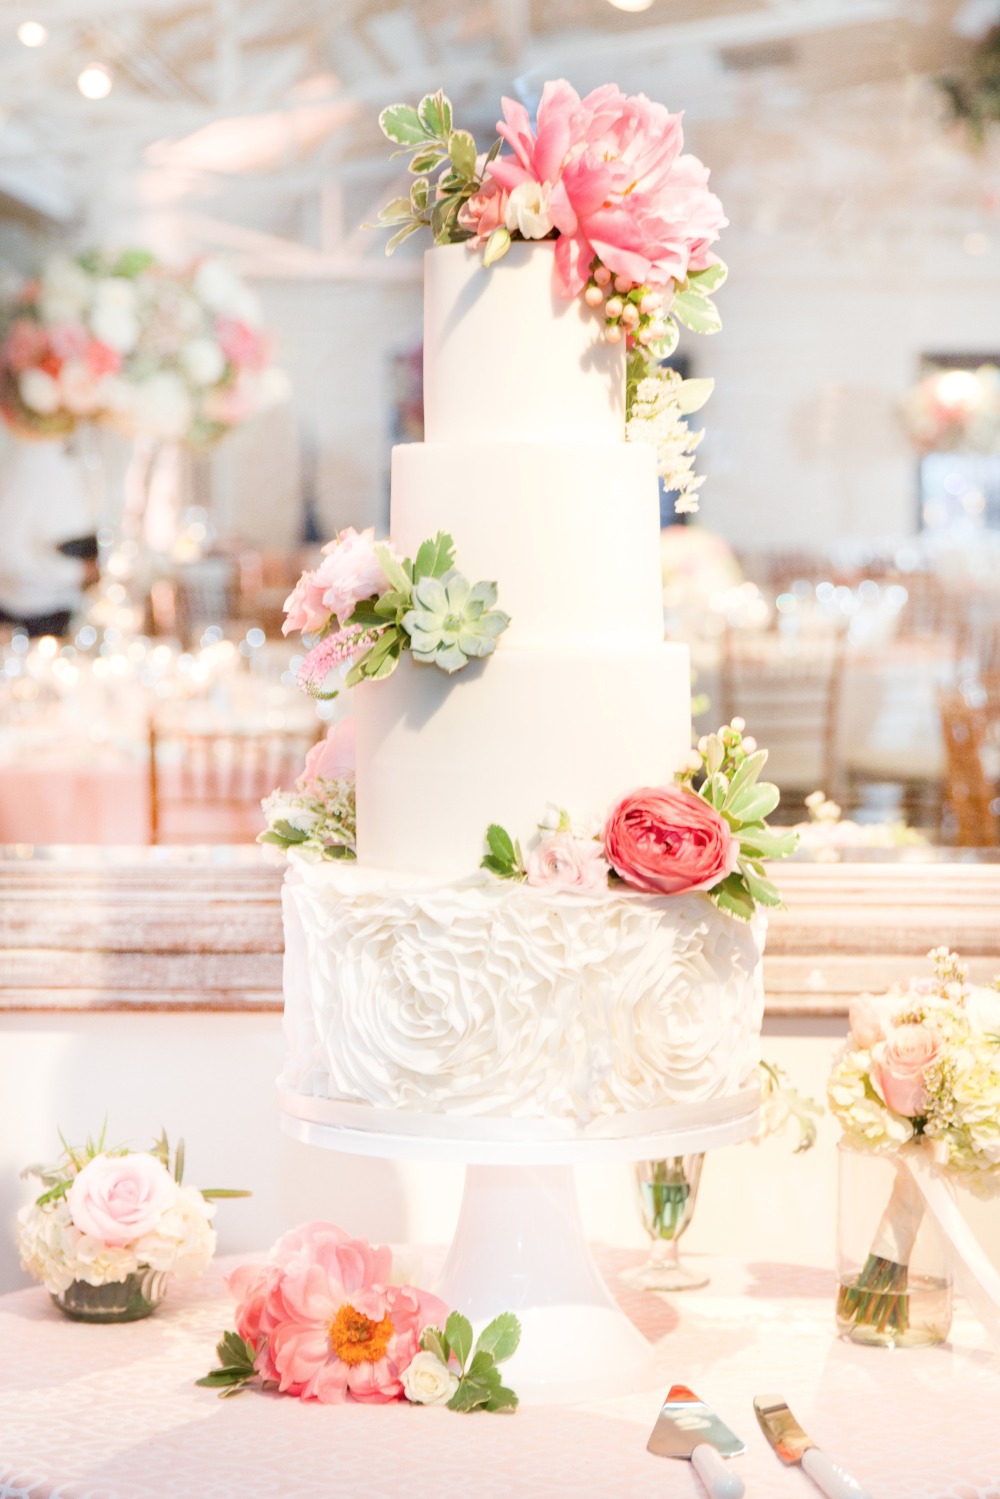 Four tier white wedding cake with florals